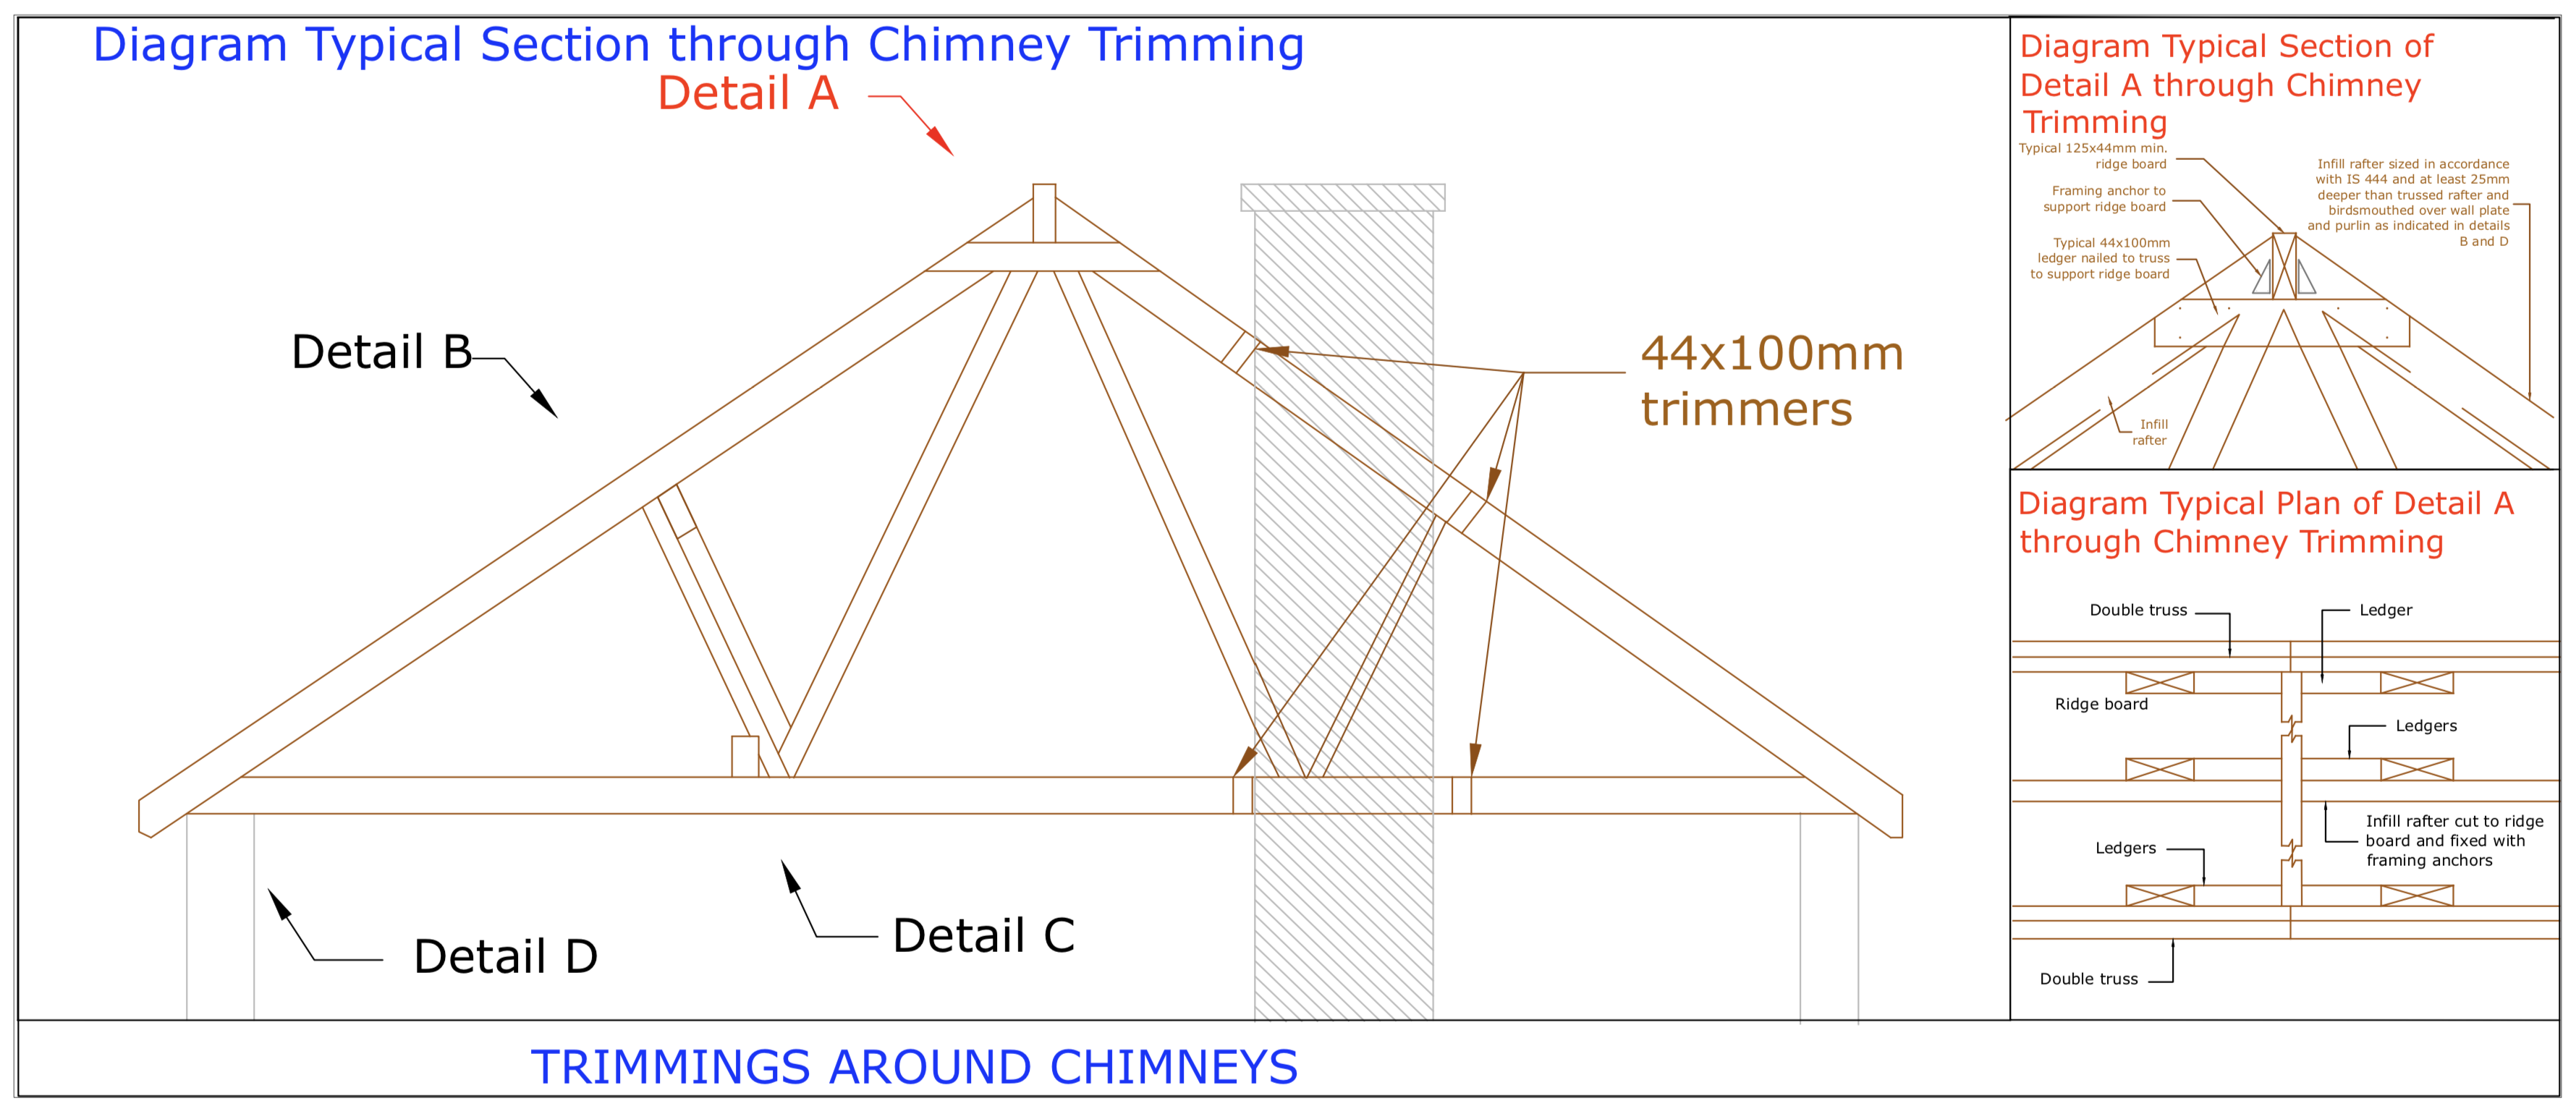 DIAGRAM D20 Section Detail A of Chimney trimming